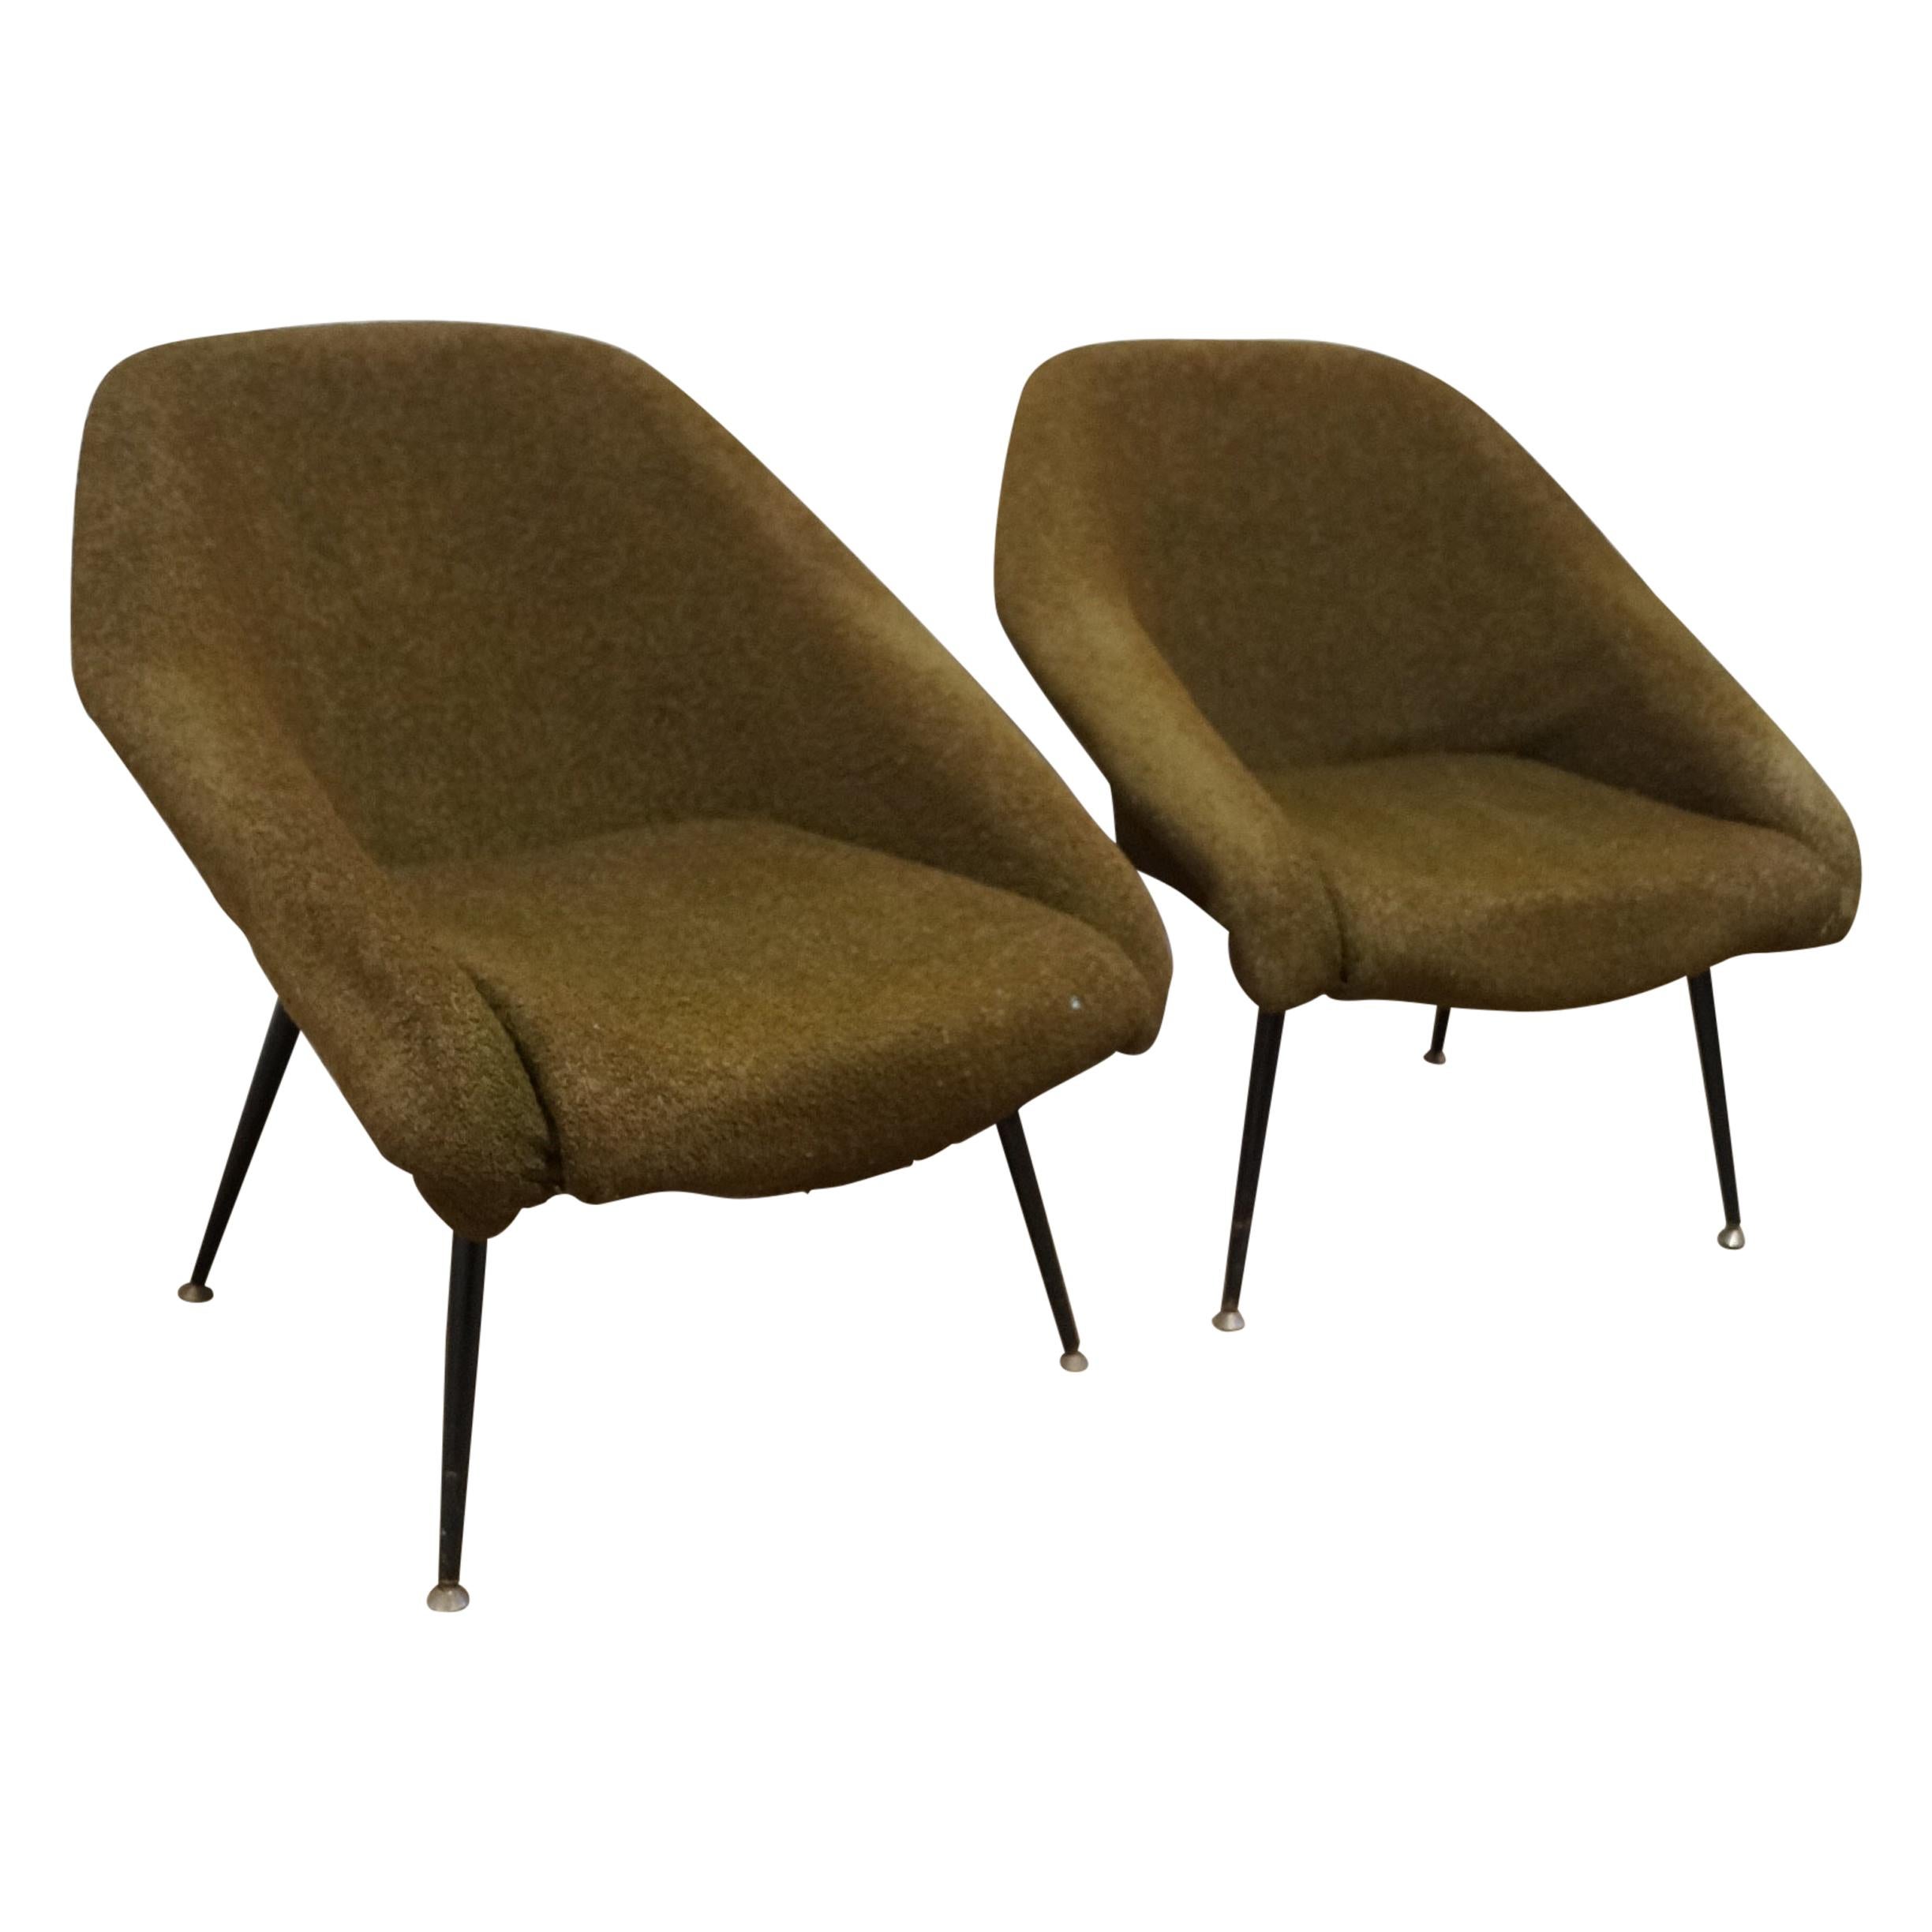 Two Armchair from 1960